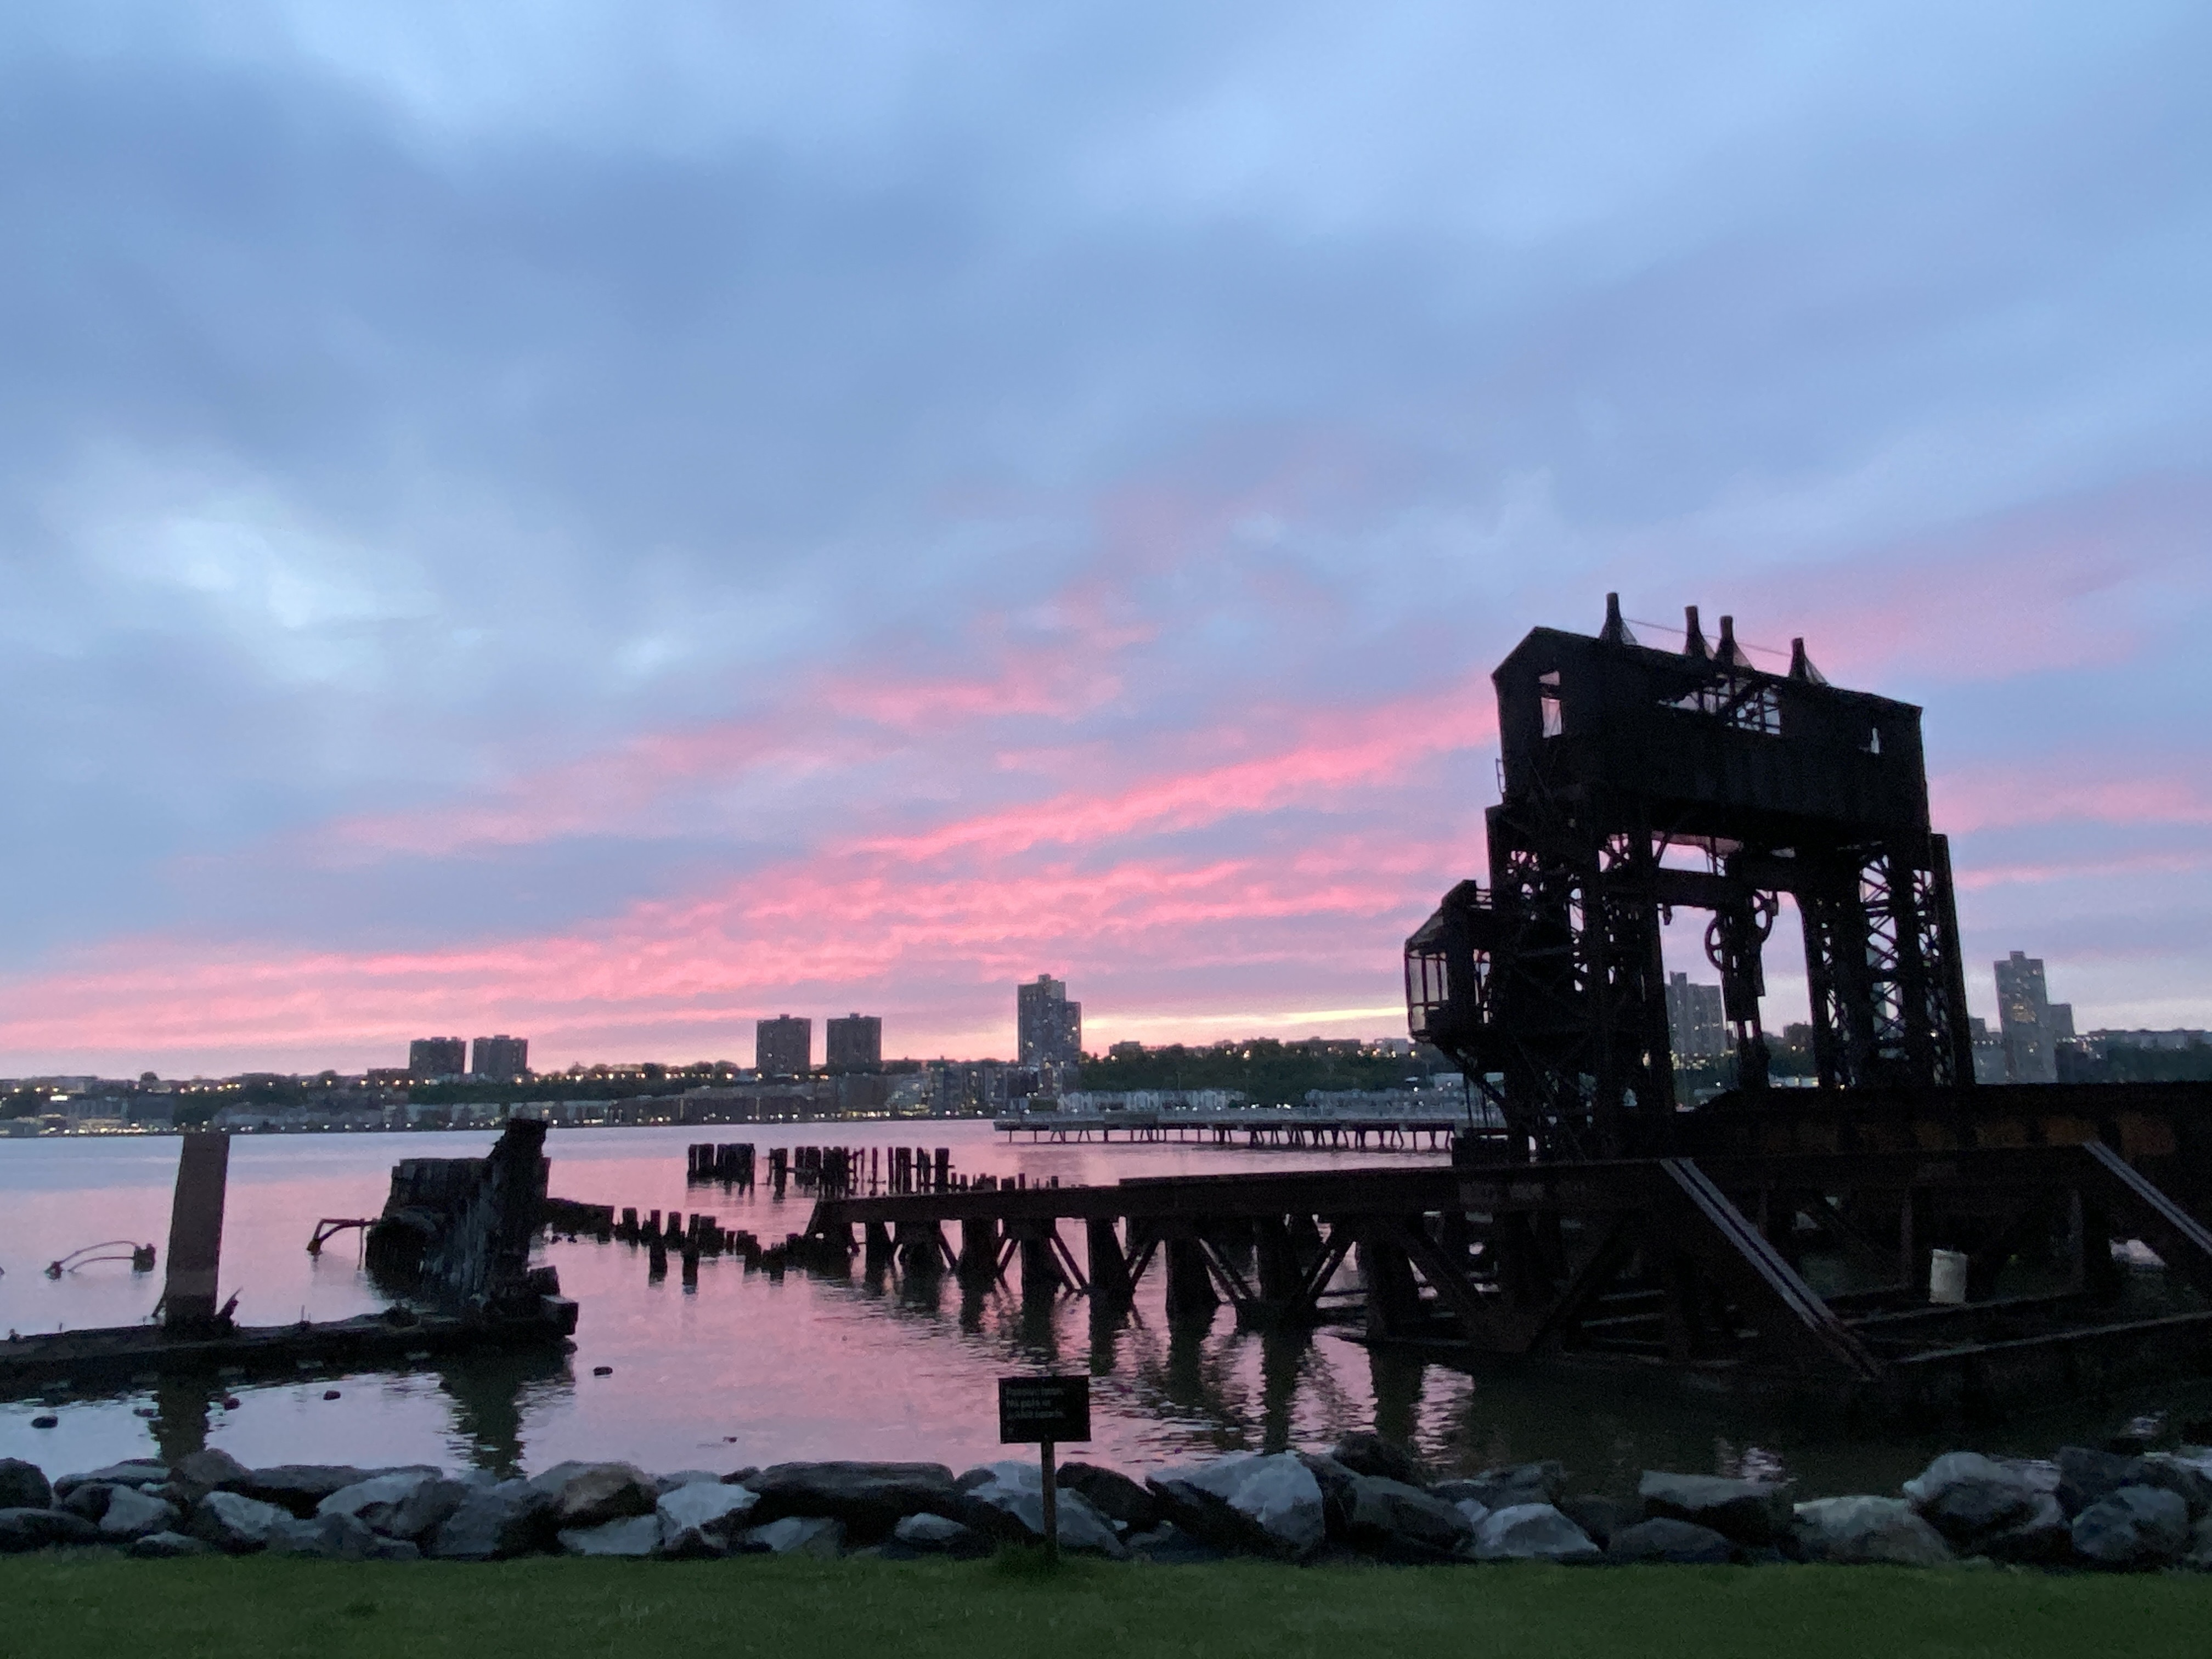 The old remains of a 19th century train transfer bridge in the Hudson River with a beautiful pink and blue sunset